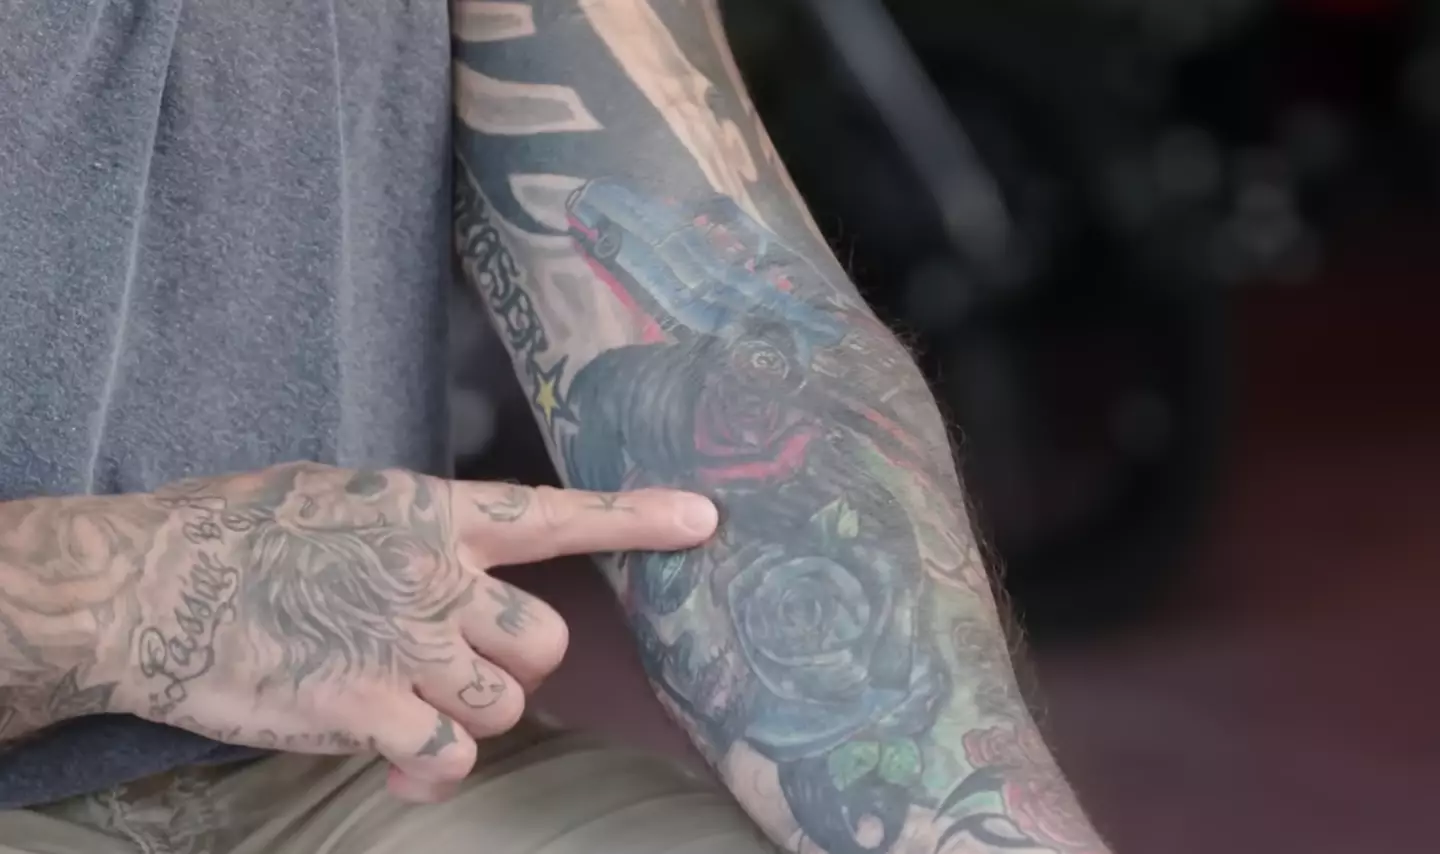 Dave Bautista had one of his arm tattoos covered.